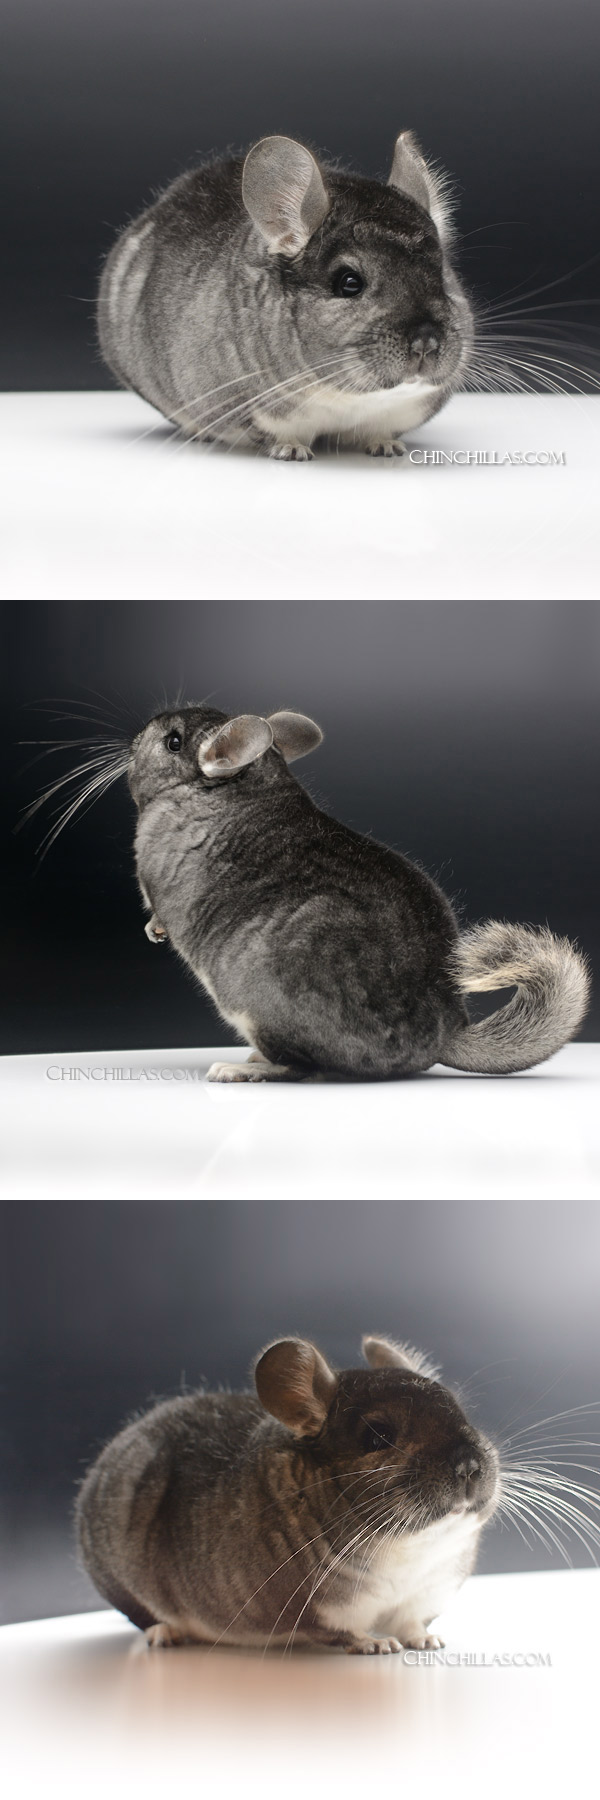 Chinchilla or related item offered for sale or export on Chinchillas.com - 23160 Show Quality Standard Female Chinchilla